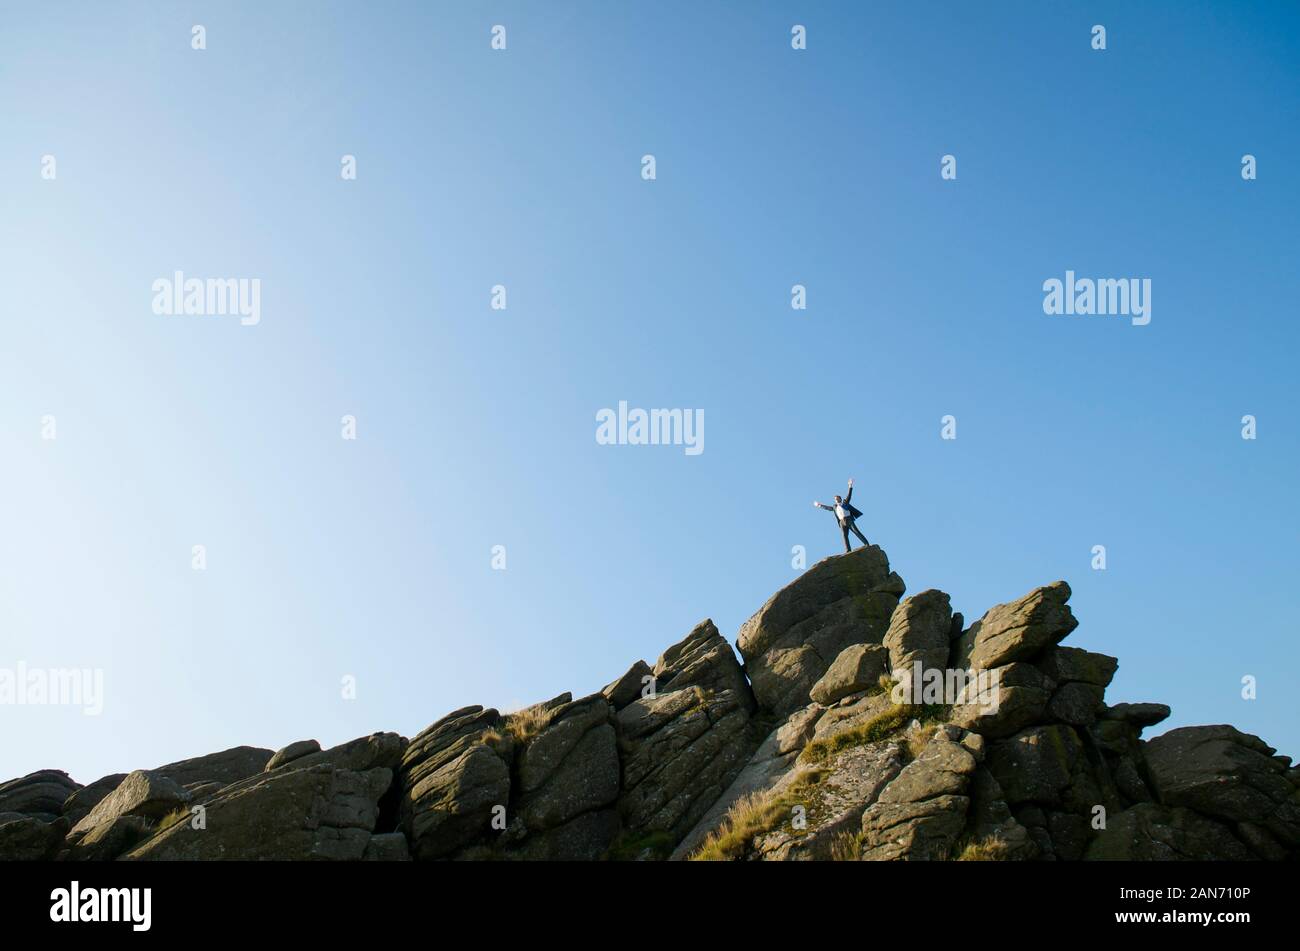 Distant businessman standing on the top of a rocky mountain peak celebrating in blue sky copy space Stock Photo